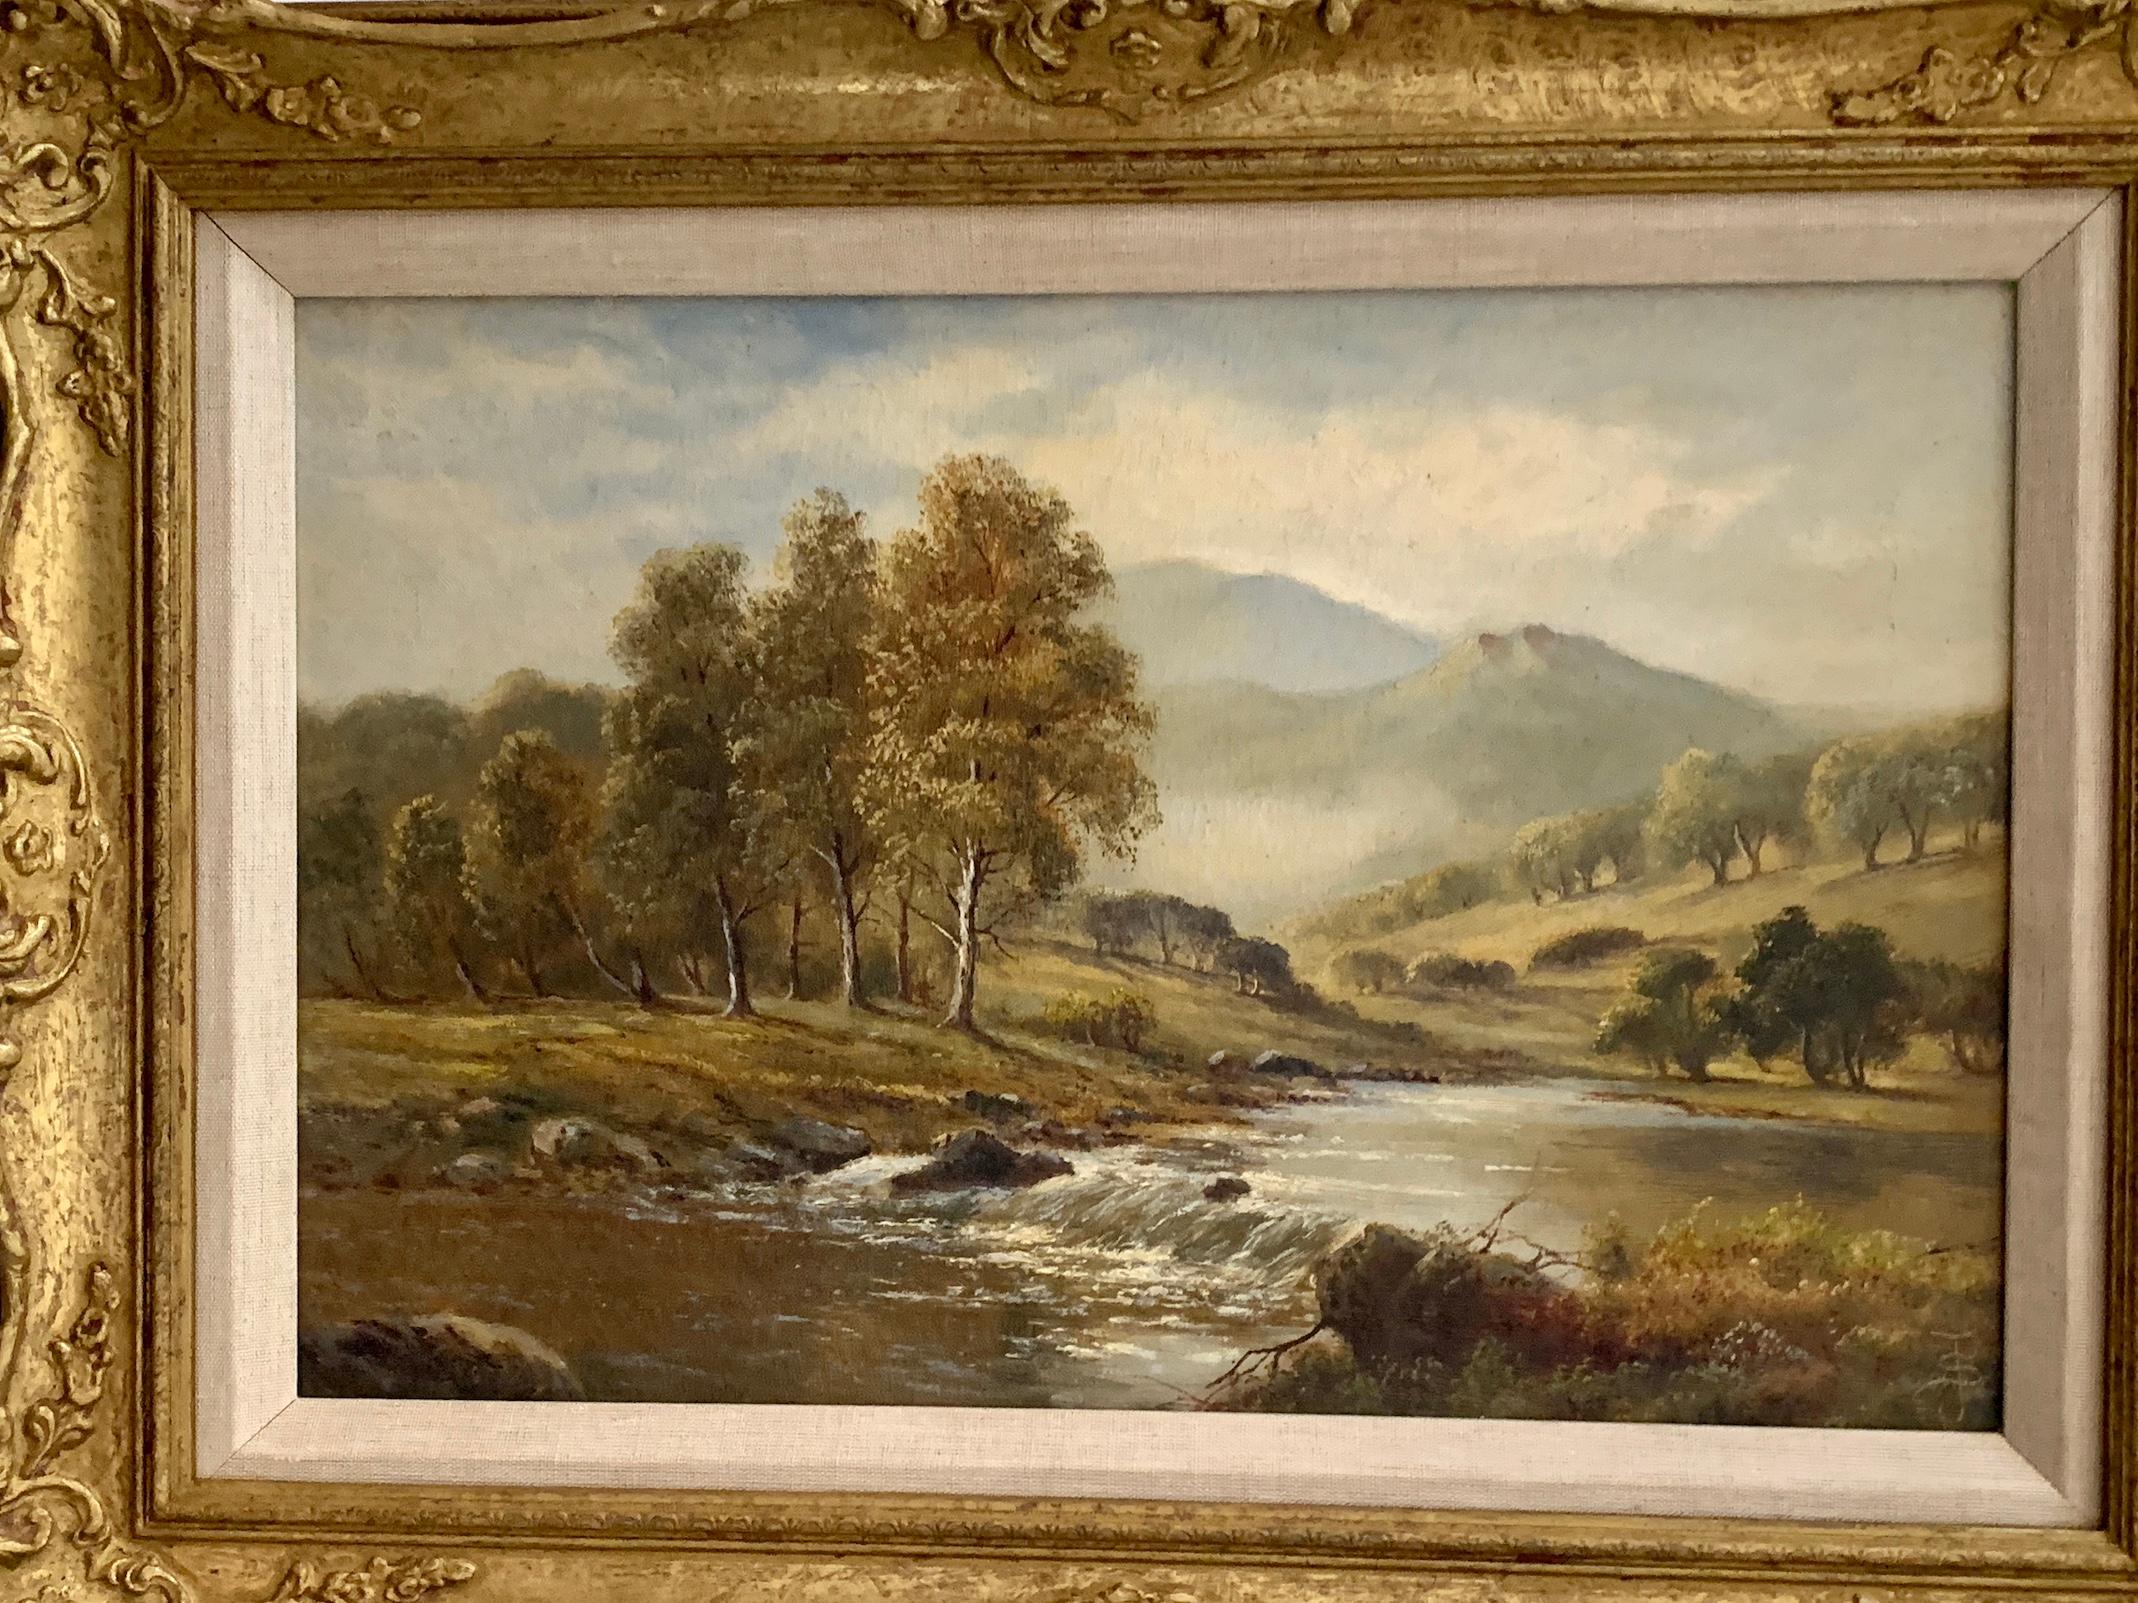 Wonderful early 20th-century oil on canvas depicting a view of the Scottish highlands known as the Trossachs.

Sidney Yates Johnson was an active painter during the late Victorian period through the 1920s in the Uk. 

Johnson was a prolific painter